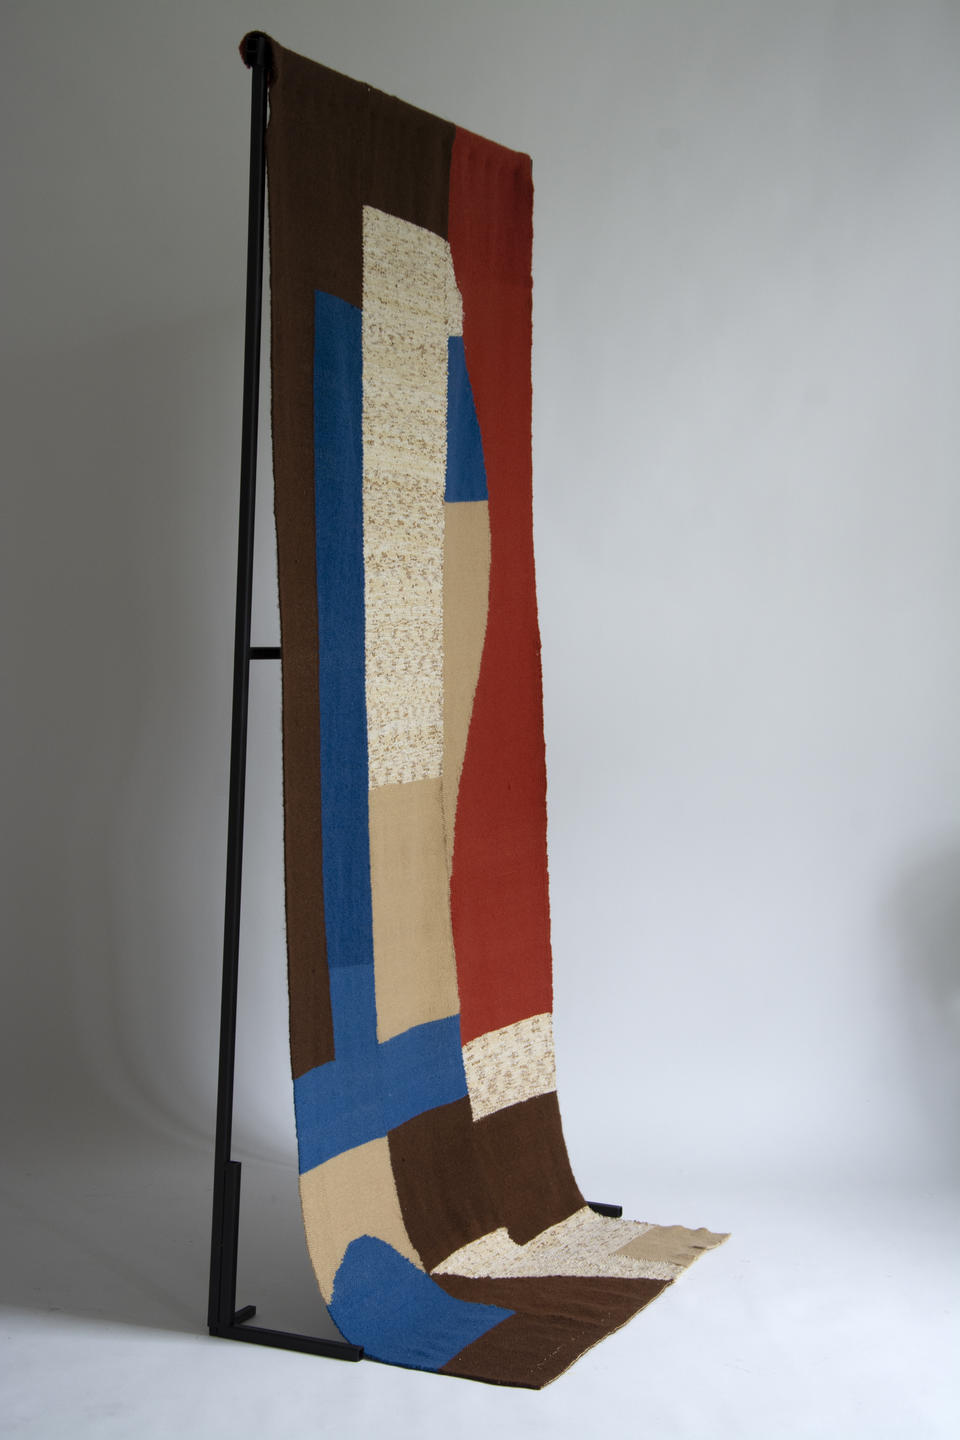 A woven tapestry, made of abstracted cobalt, vermillion, brown and beige shapes.